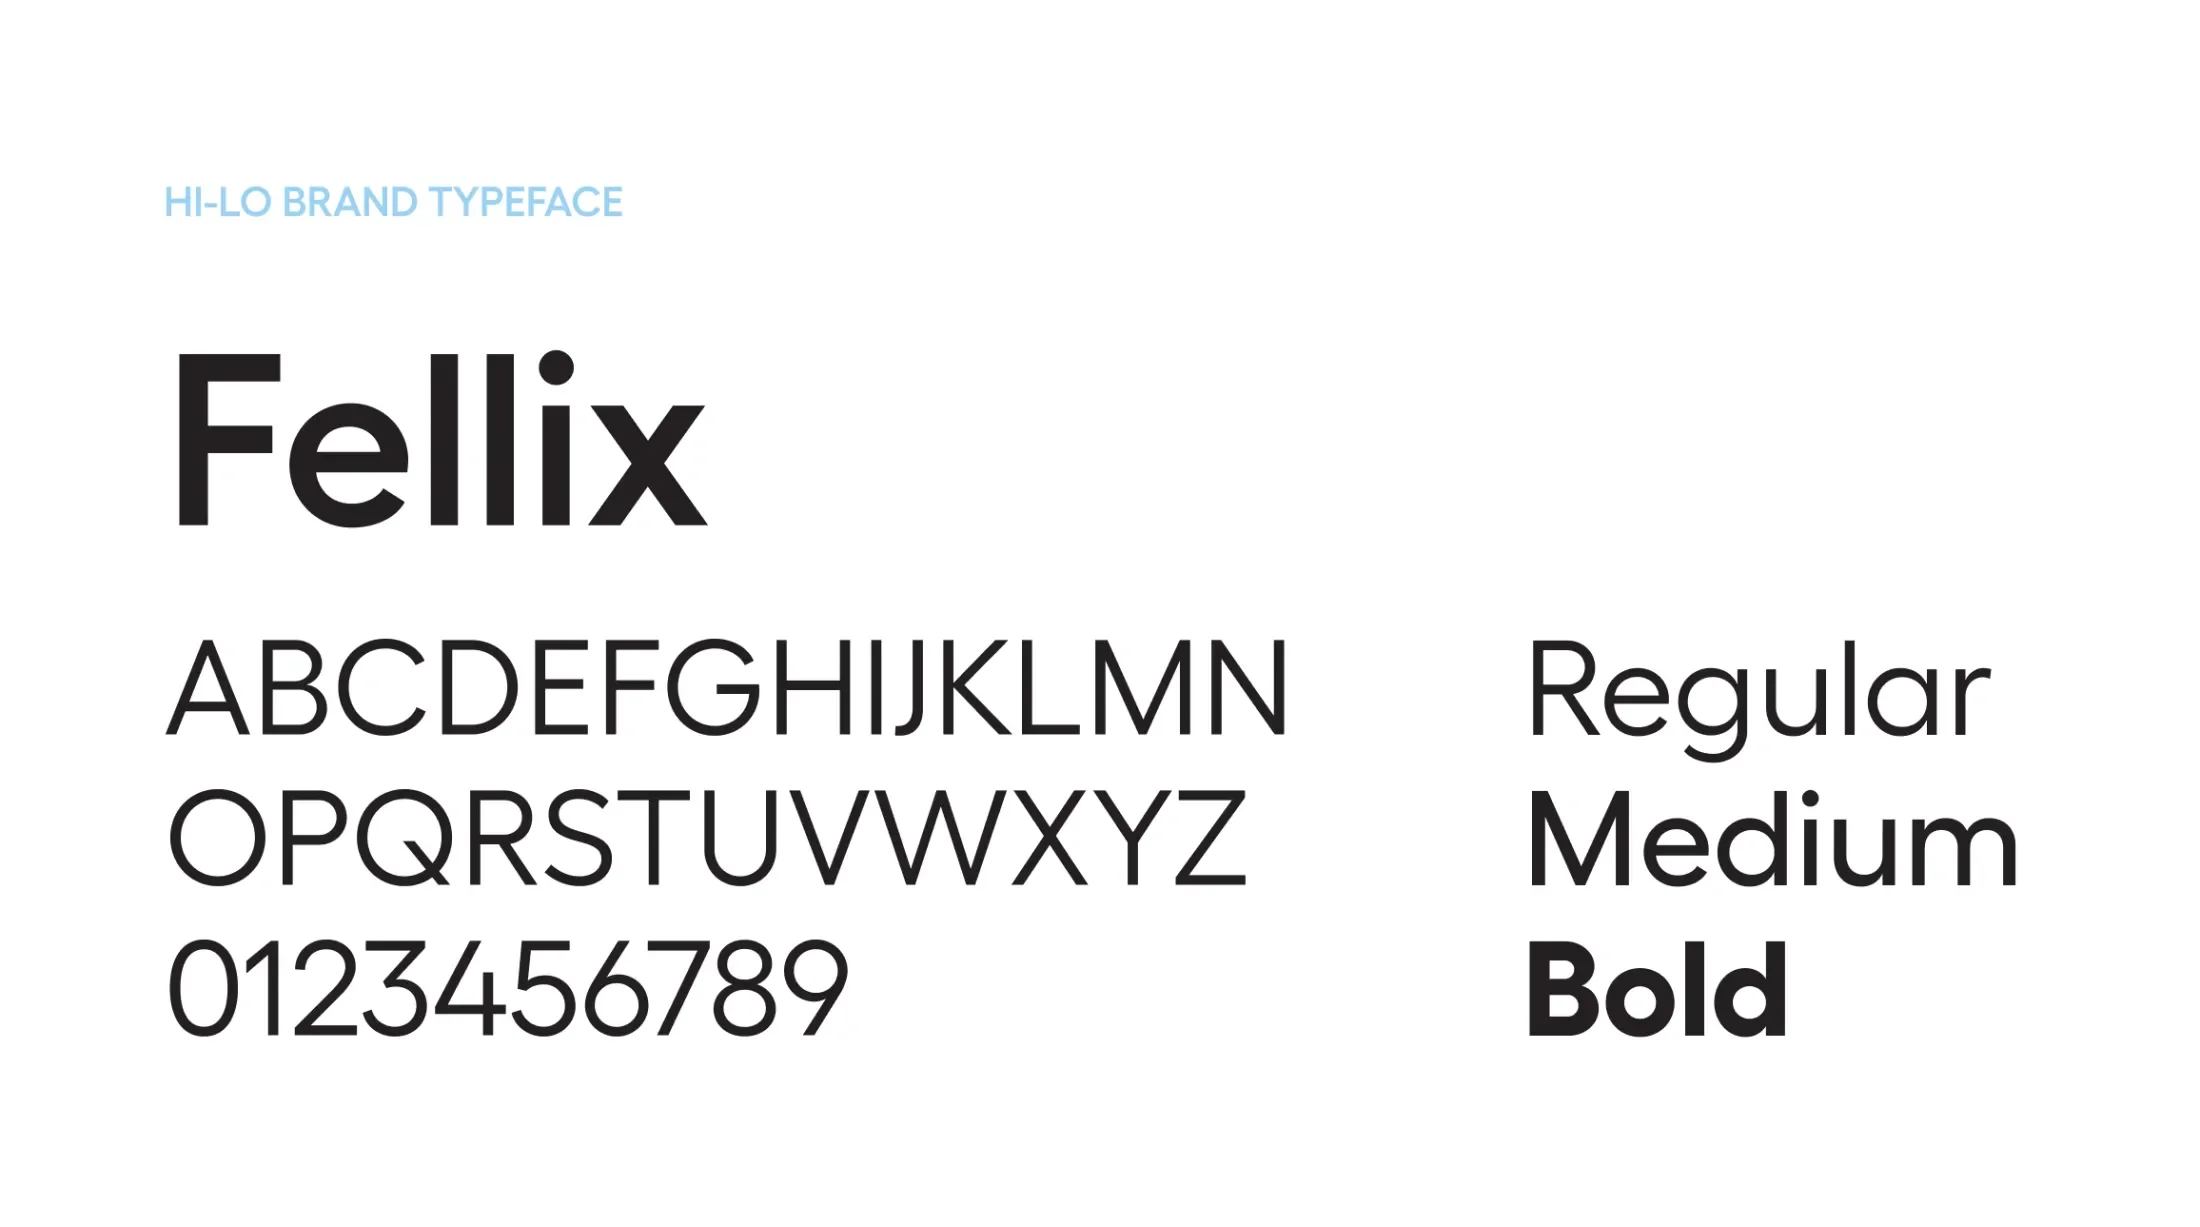 Hi-Lo brand typeface featuring the Fellix font